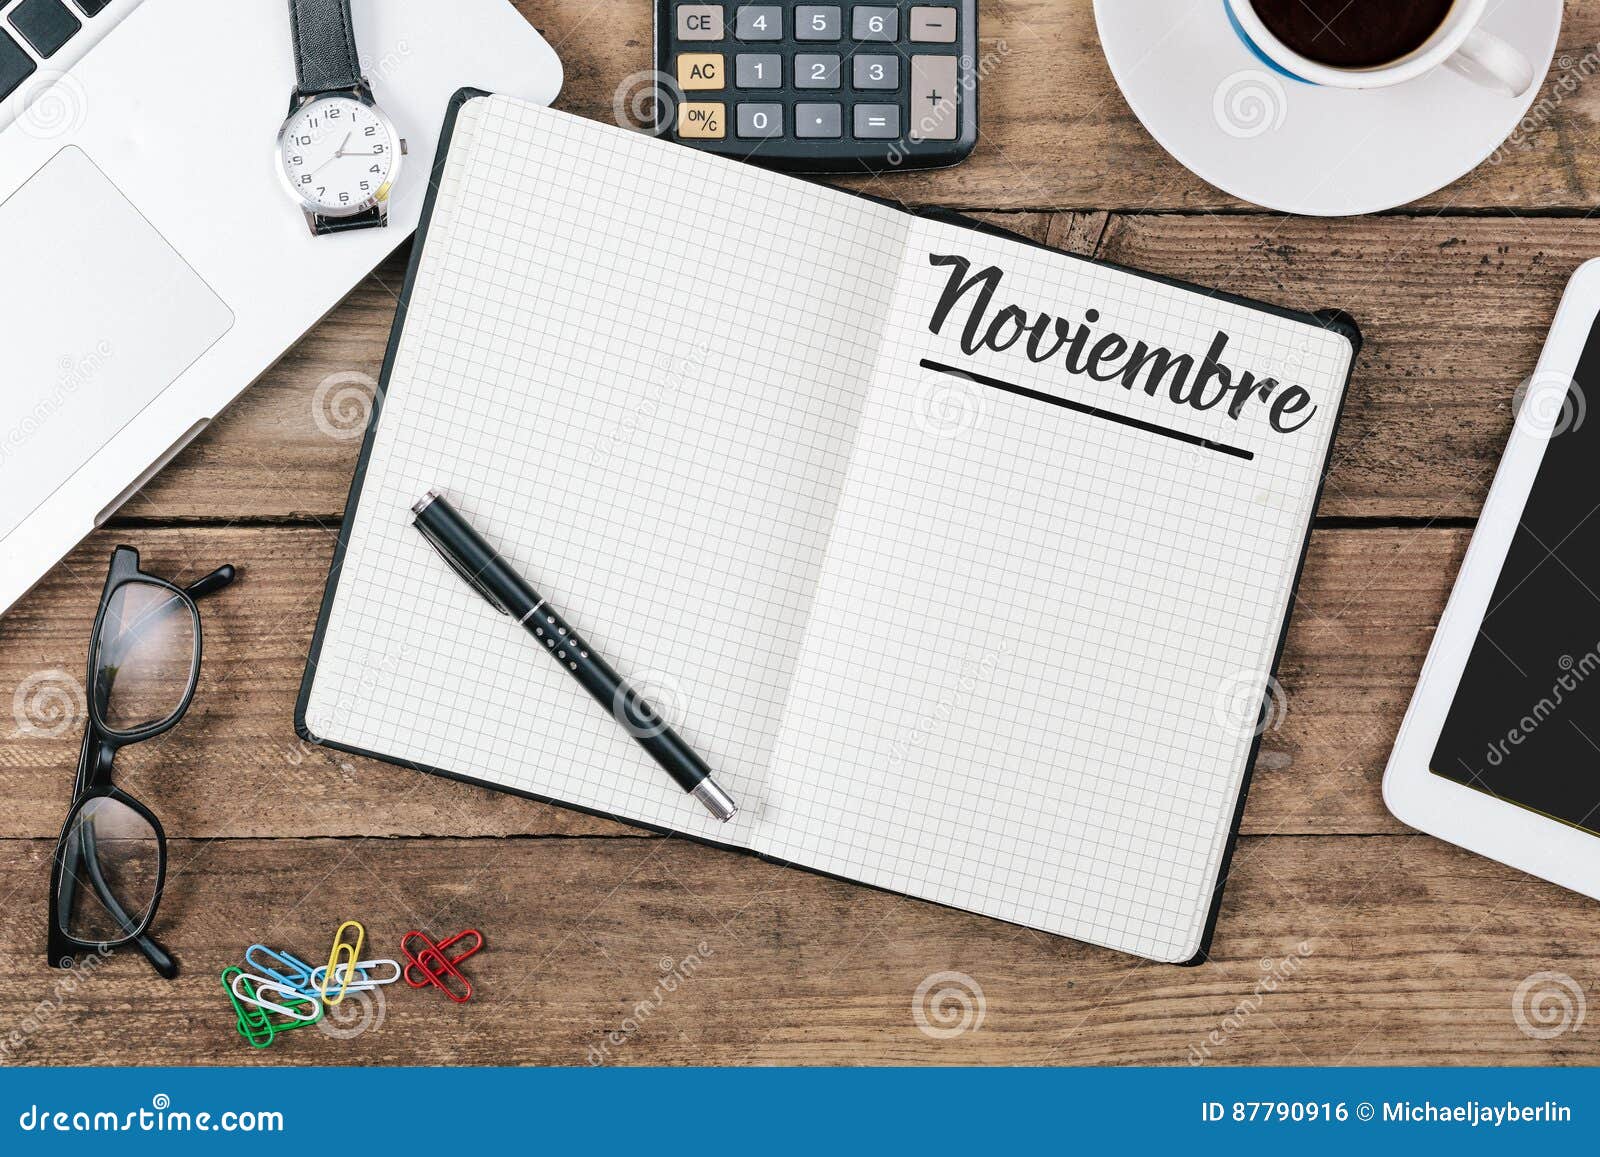 noviembre spanish november month name on paper note pad at off